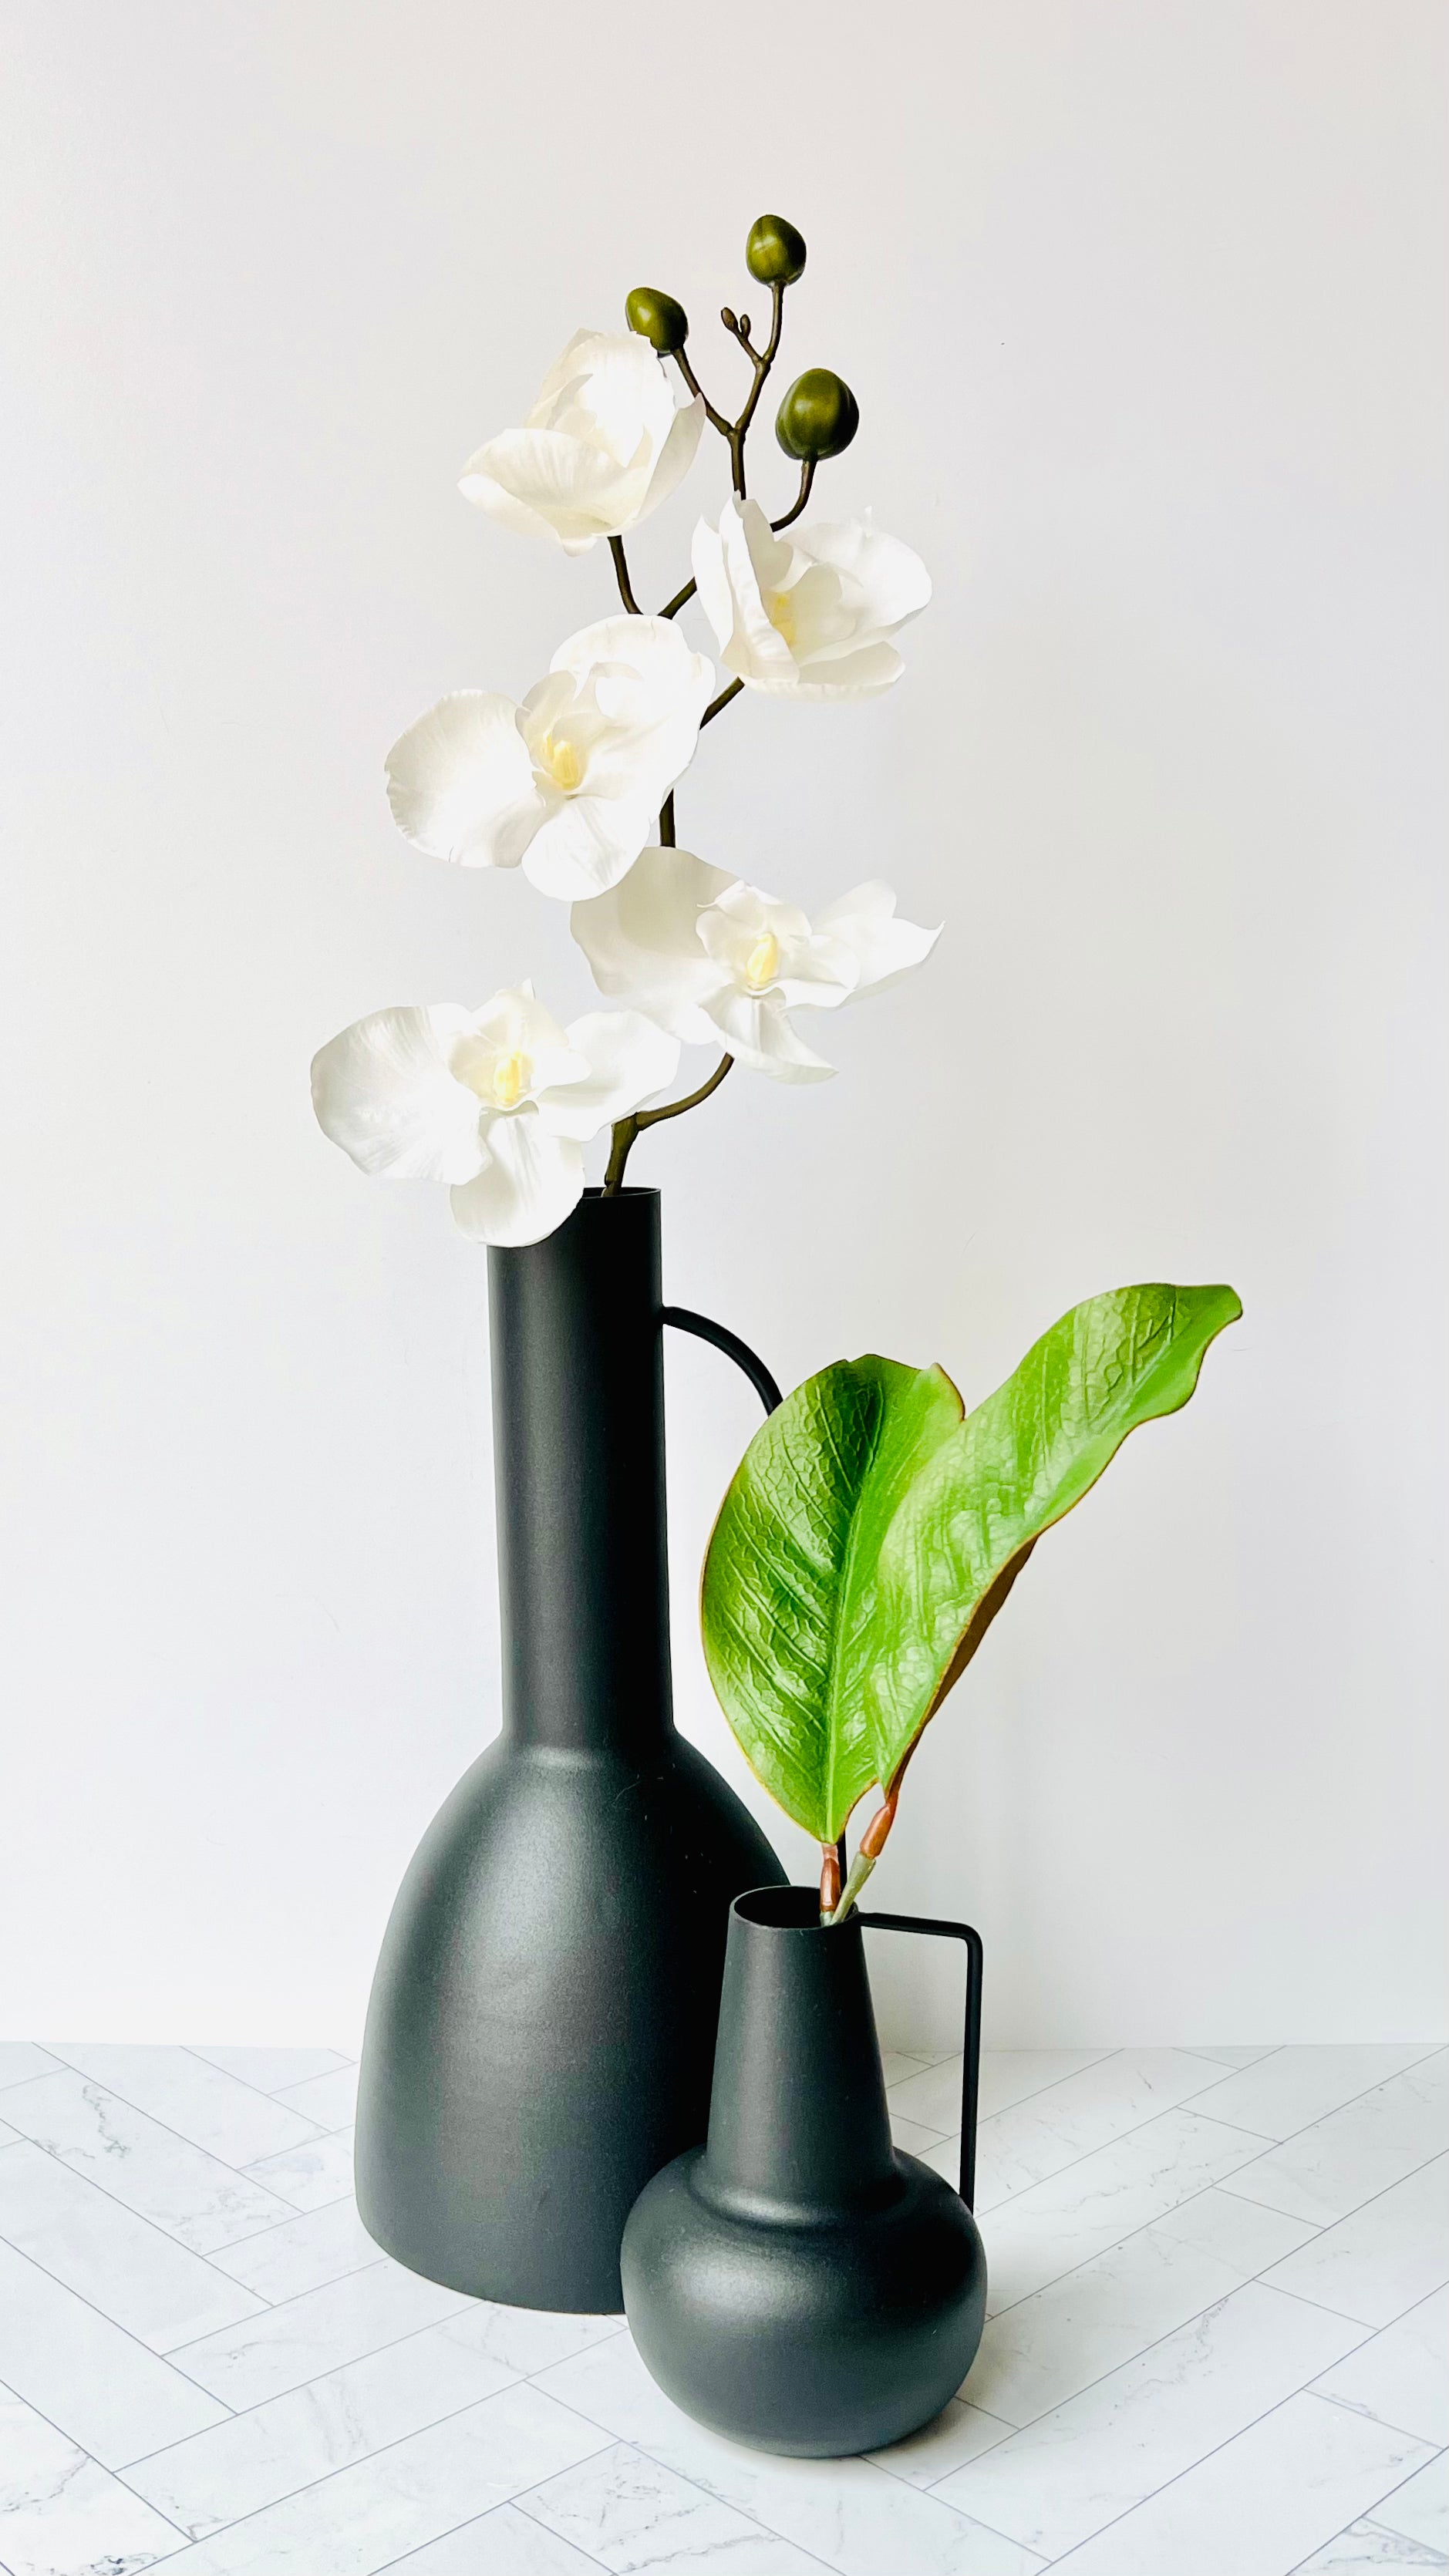 The Sleek Black Vase on a table filled with white flowers with the Sleek Bud Vase next to it filled with green leaves